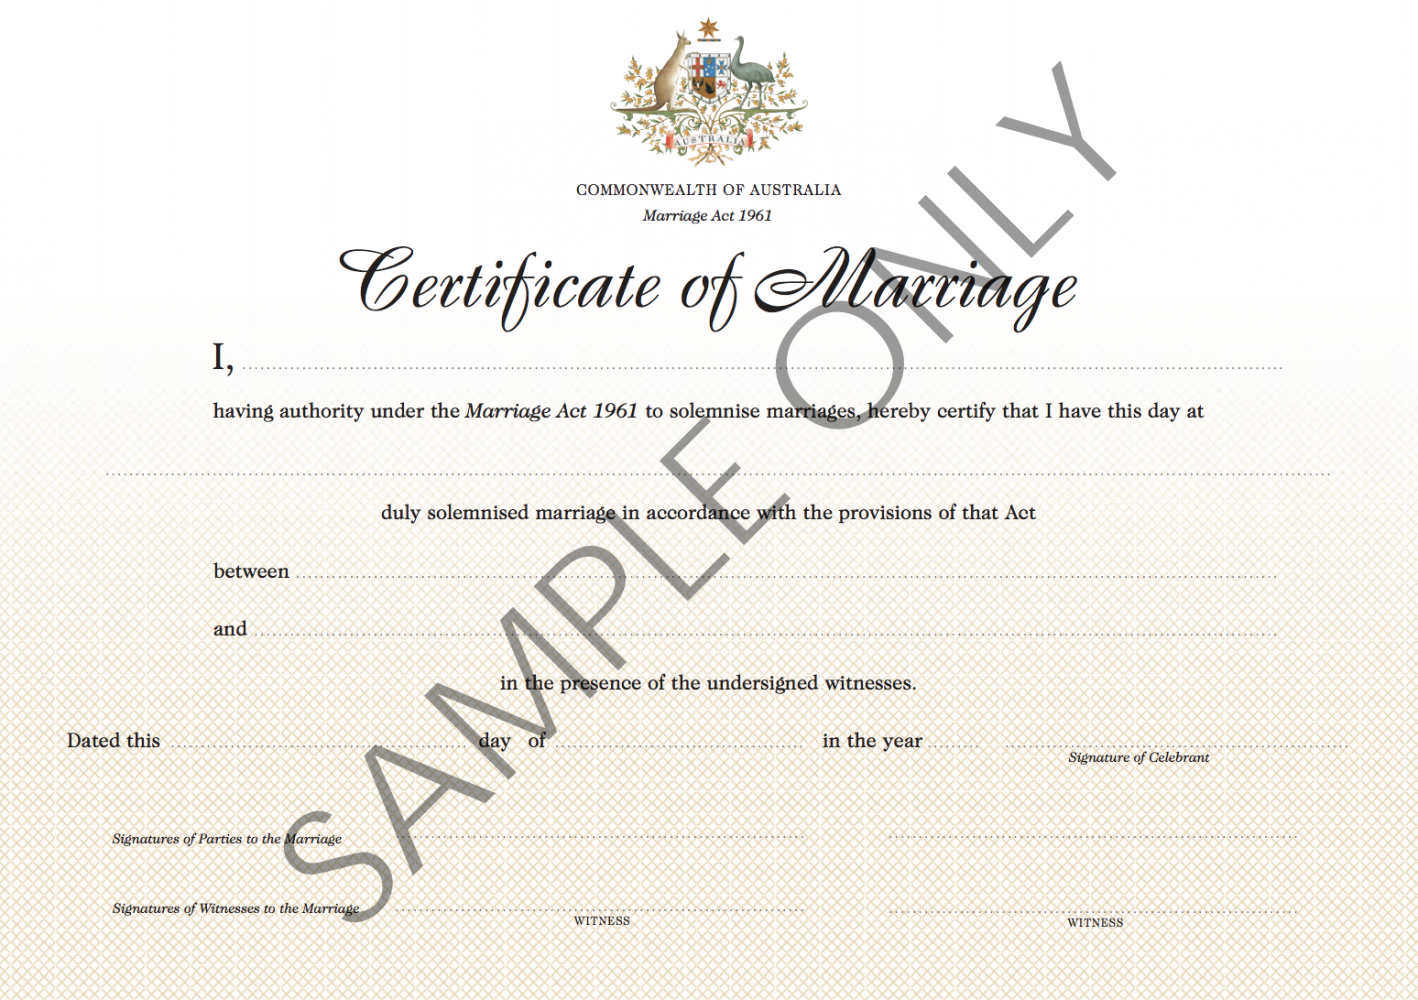 Image of a Commonwealth Marriage Certificate, exemplifying the official documentation couples receive on their wedding day with Ash Reynolds.